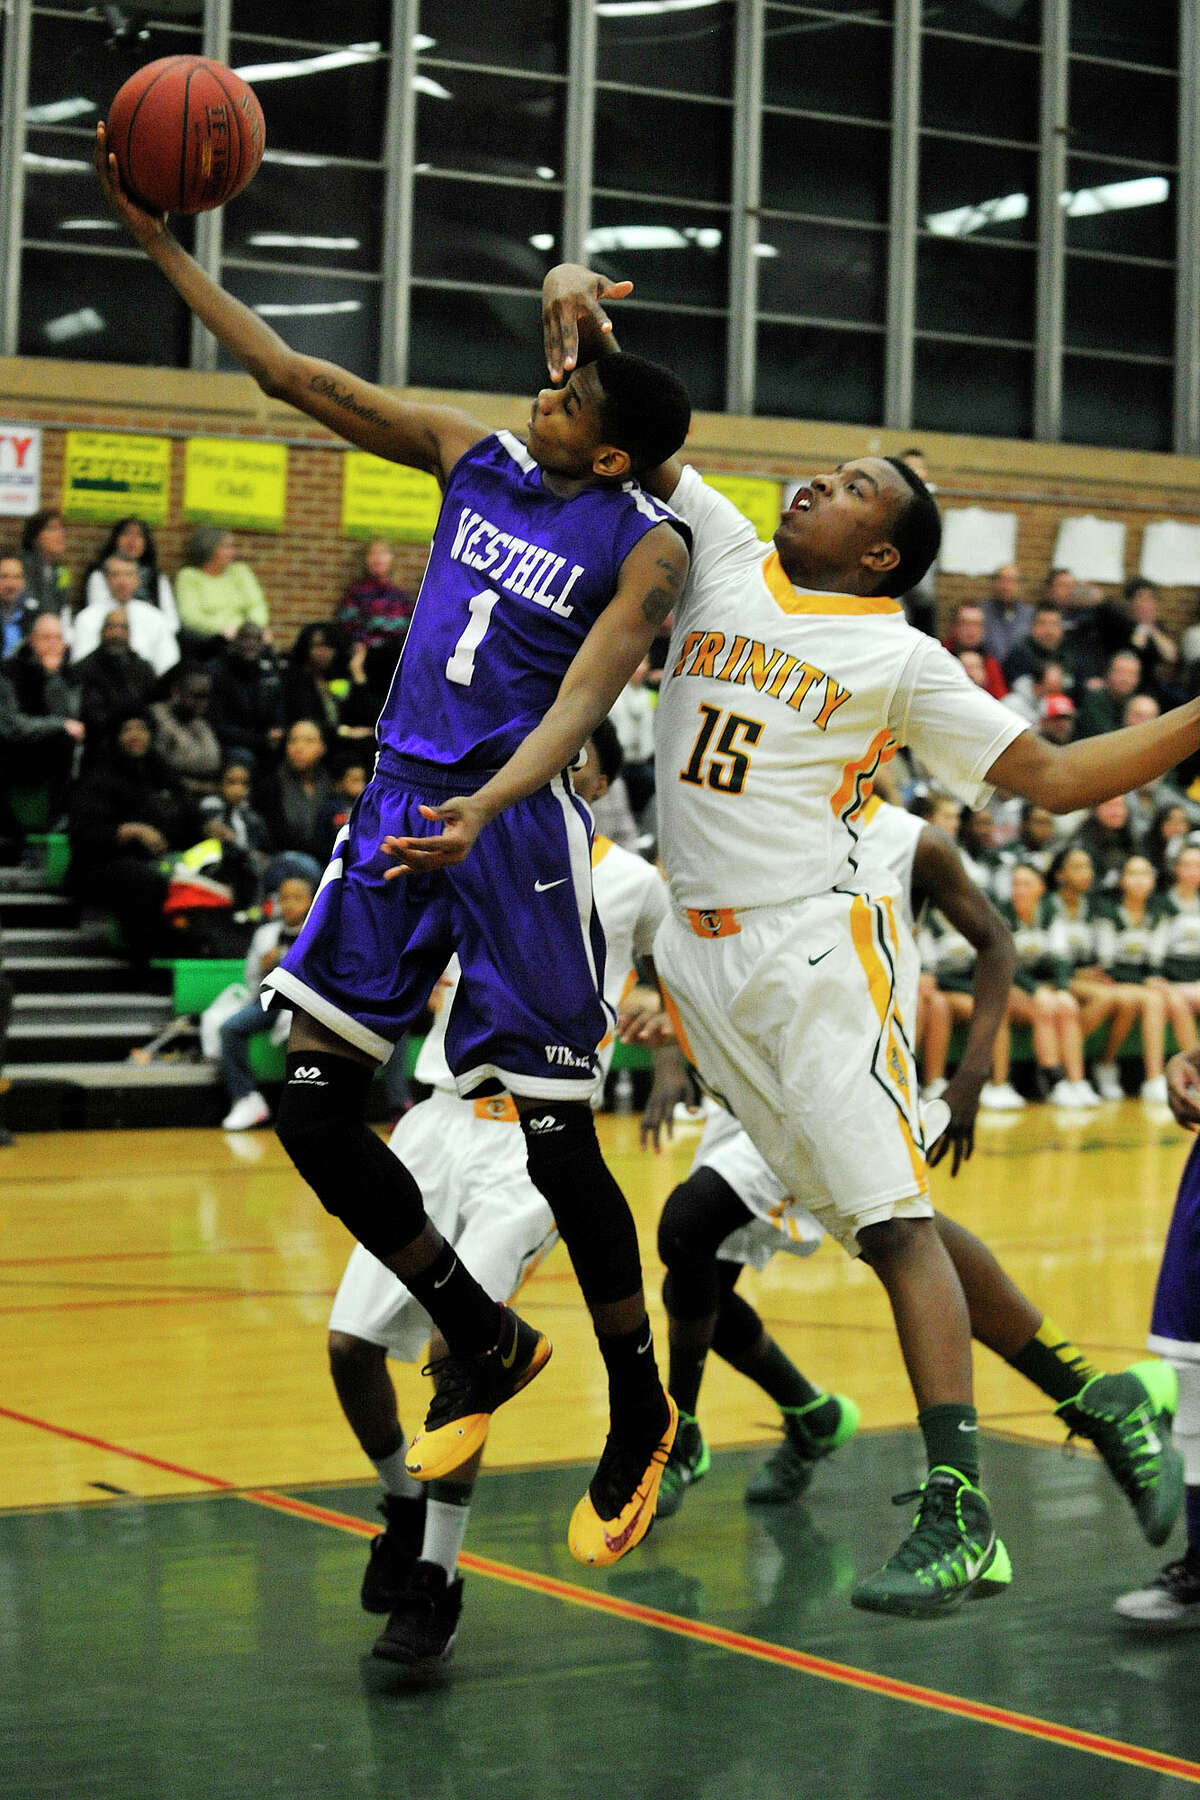 Westhill's Jeremiah Livingston attempts to lay the ball in with Trinity Catholic's Tyrell St. John's hand in his face during their game at Trinity Catholic High School in Stamford, Conn., on Wednesday, Feb. 26, 2014. Westhill won, 67-63.